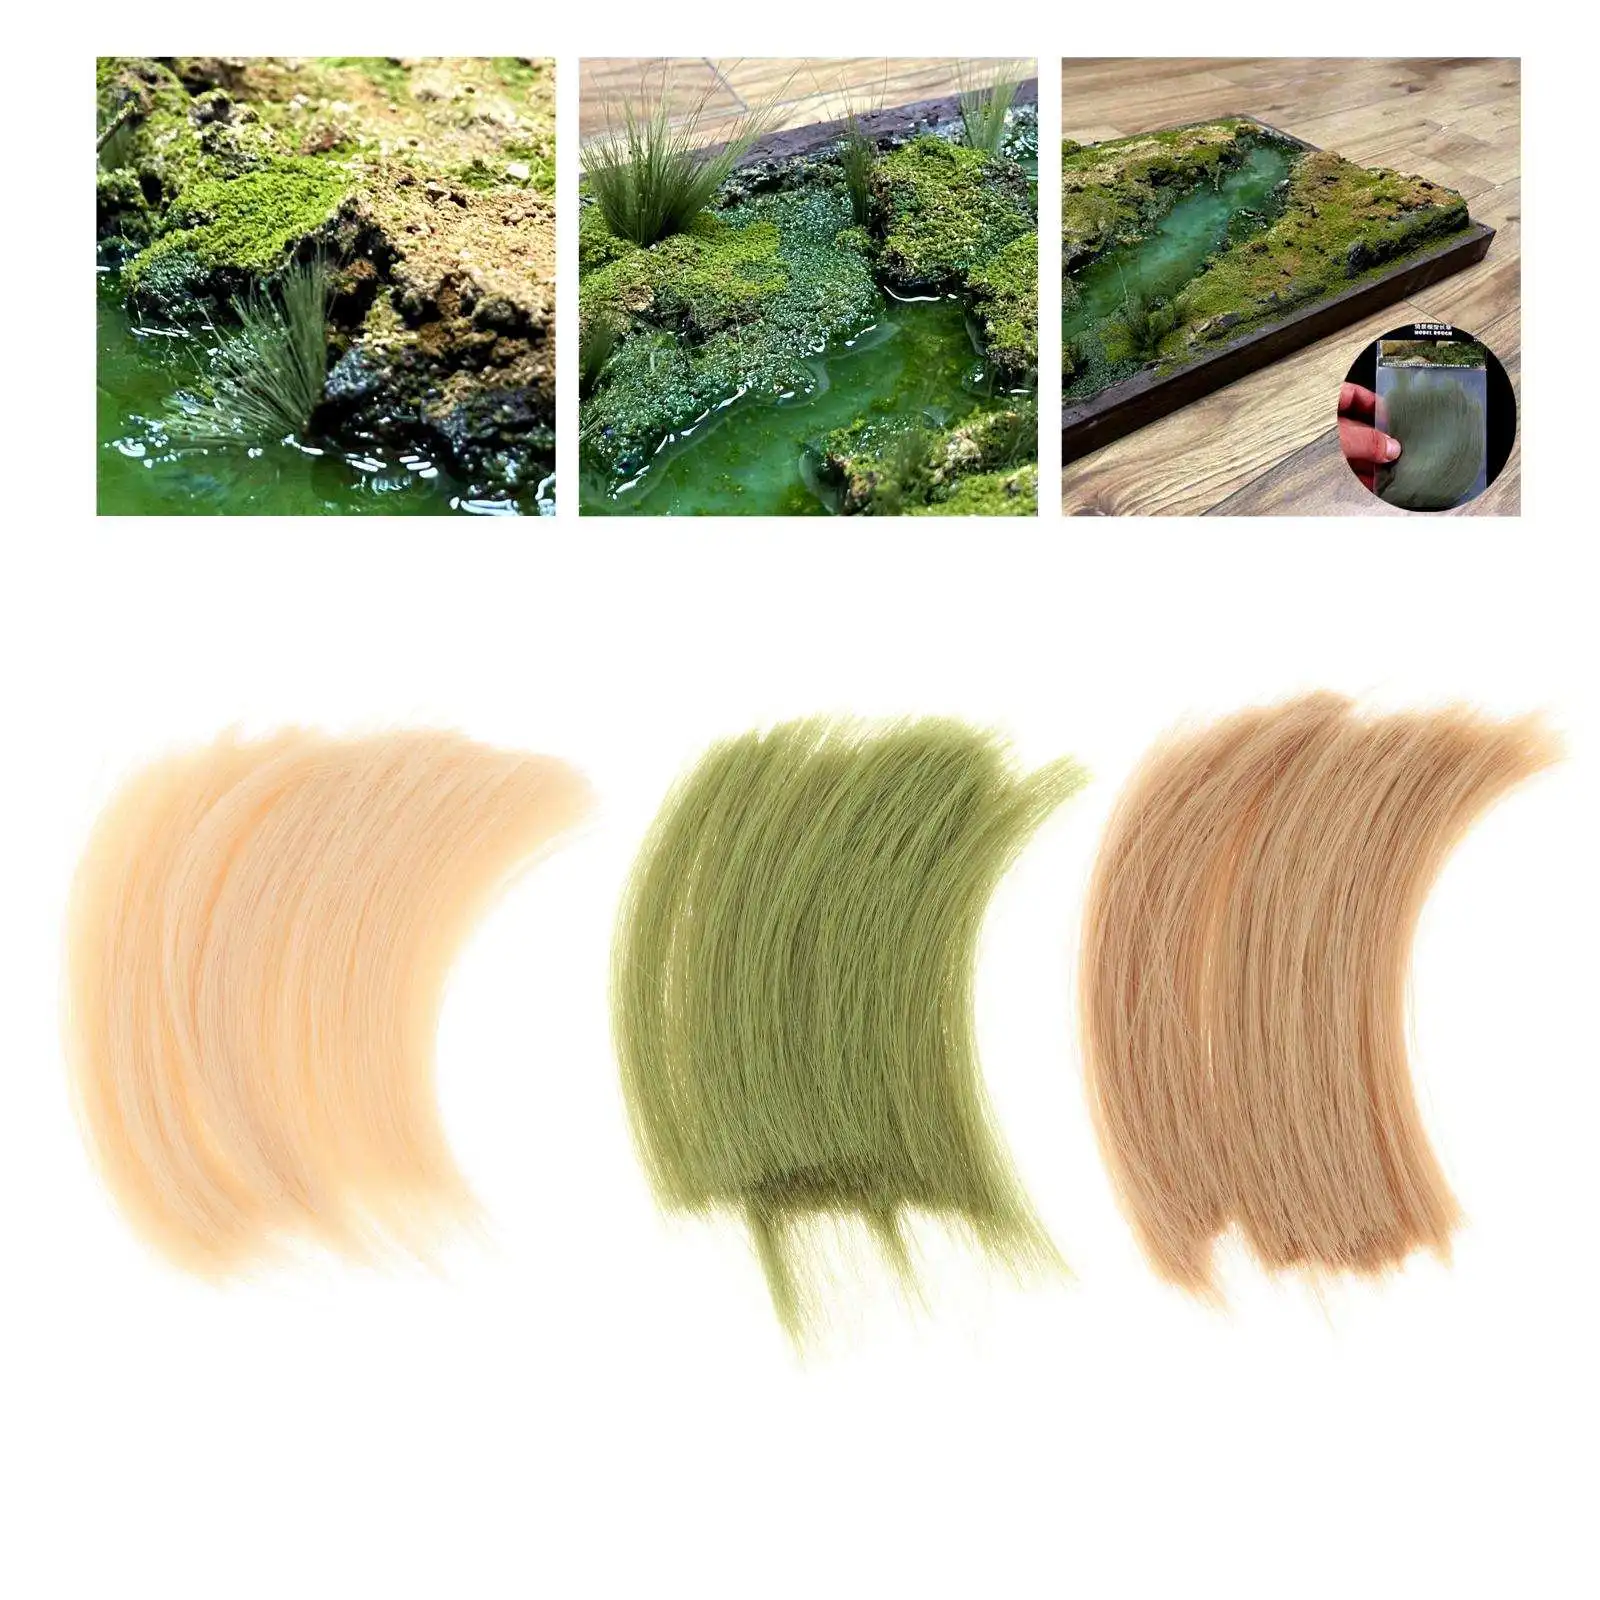 10cm Static Grass Making Material Simulation Decoration Ornament Props Diorama Landscaping for Sand Table Models Building Models